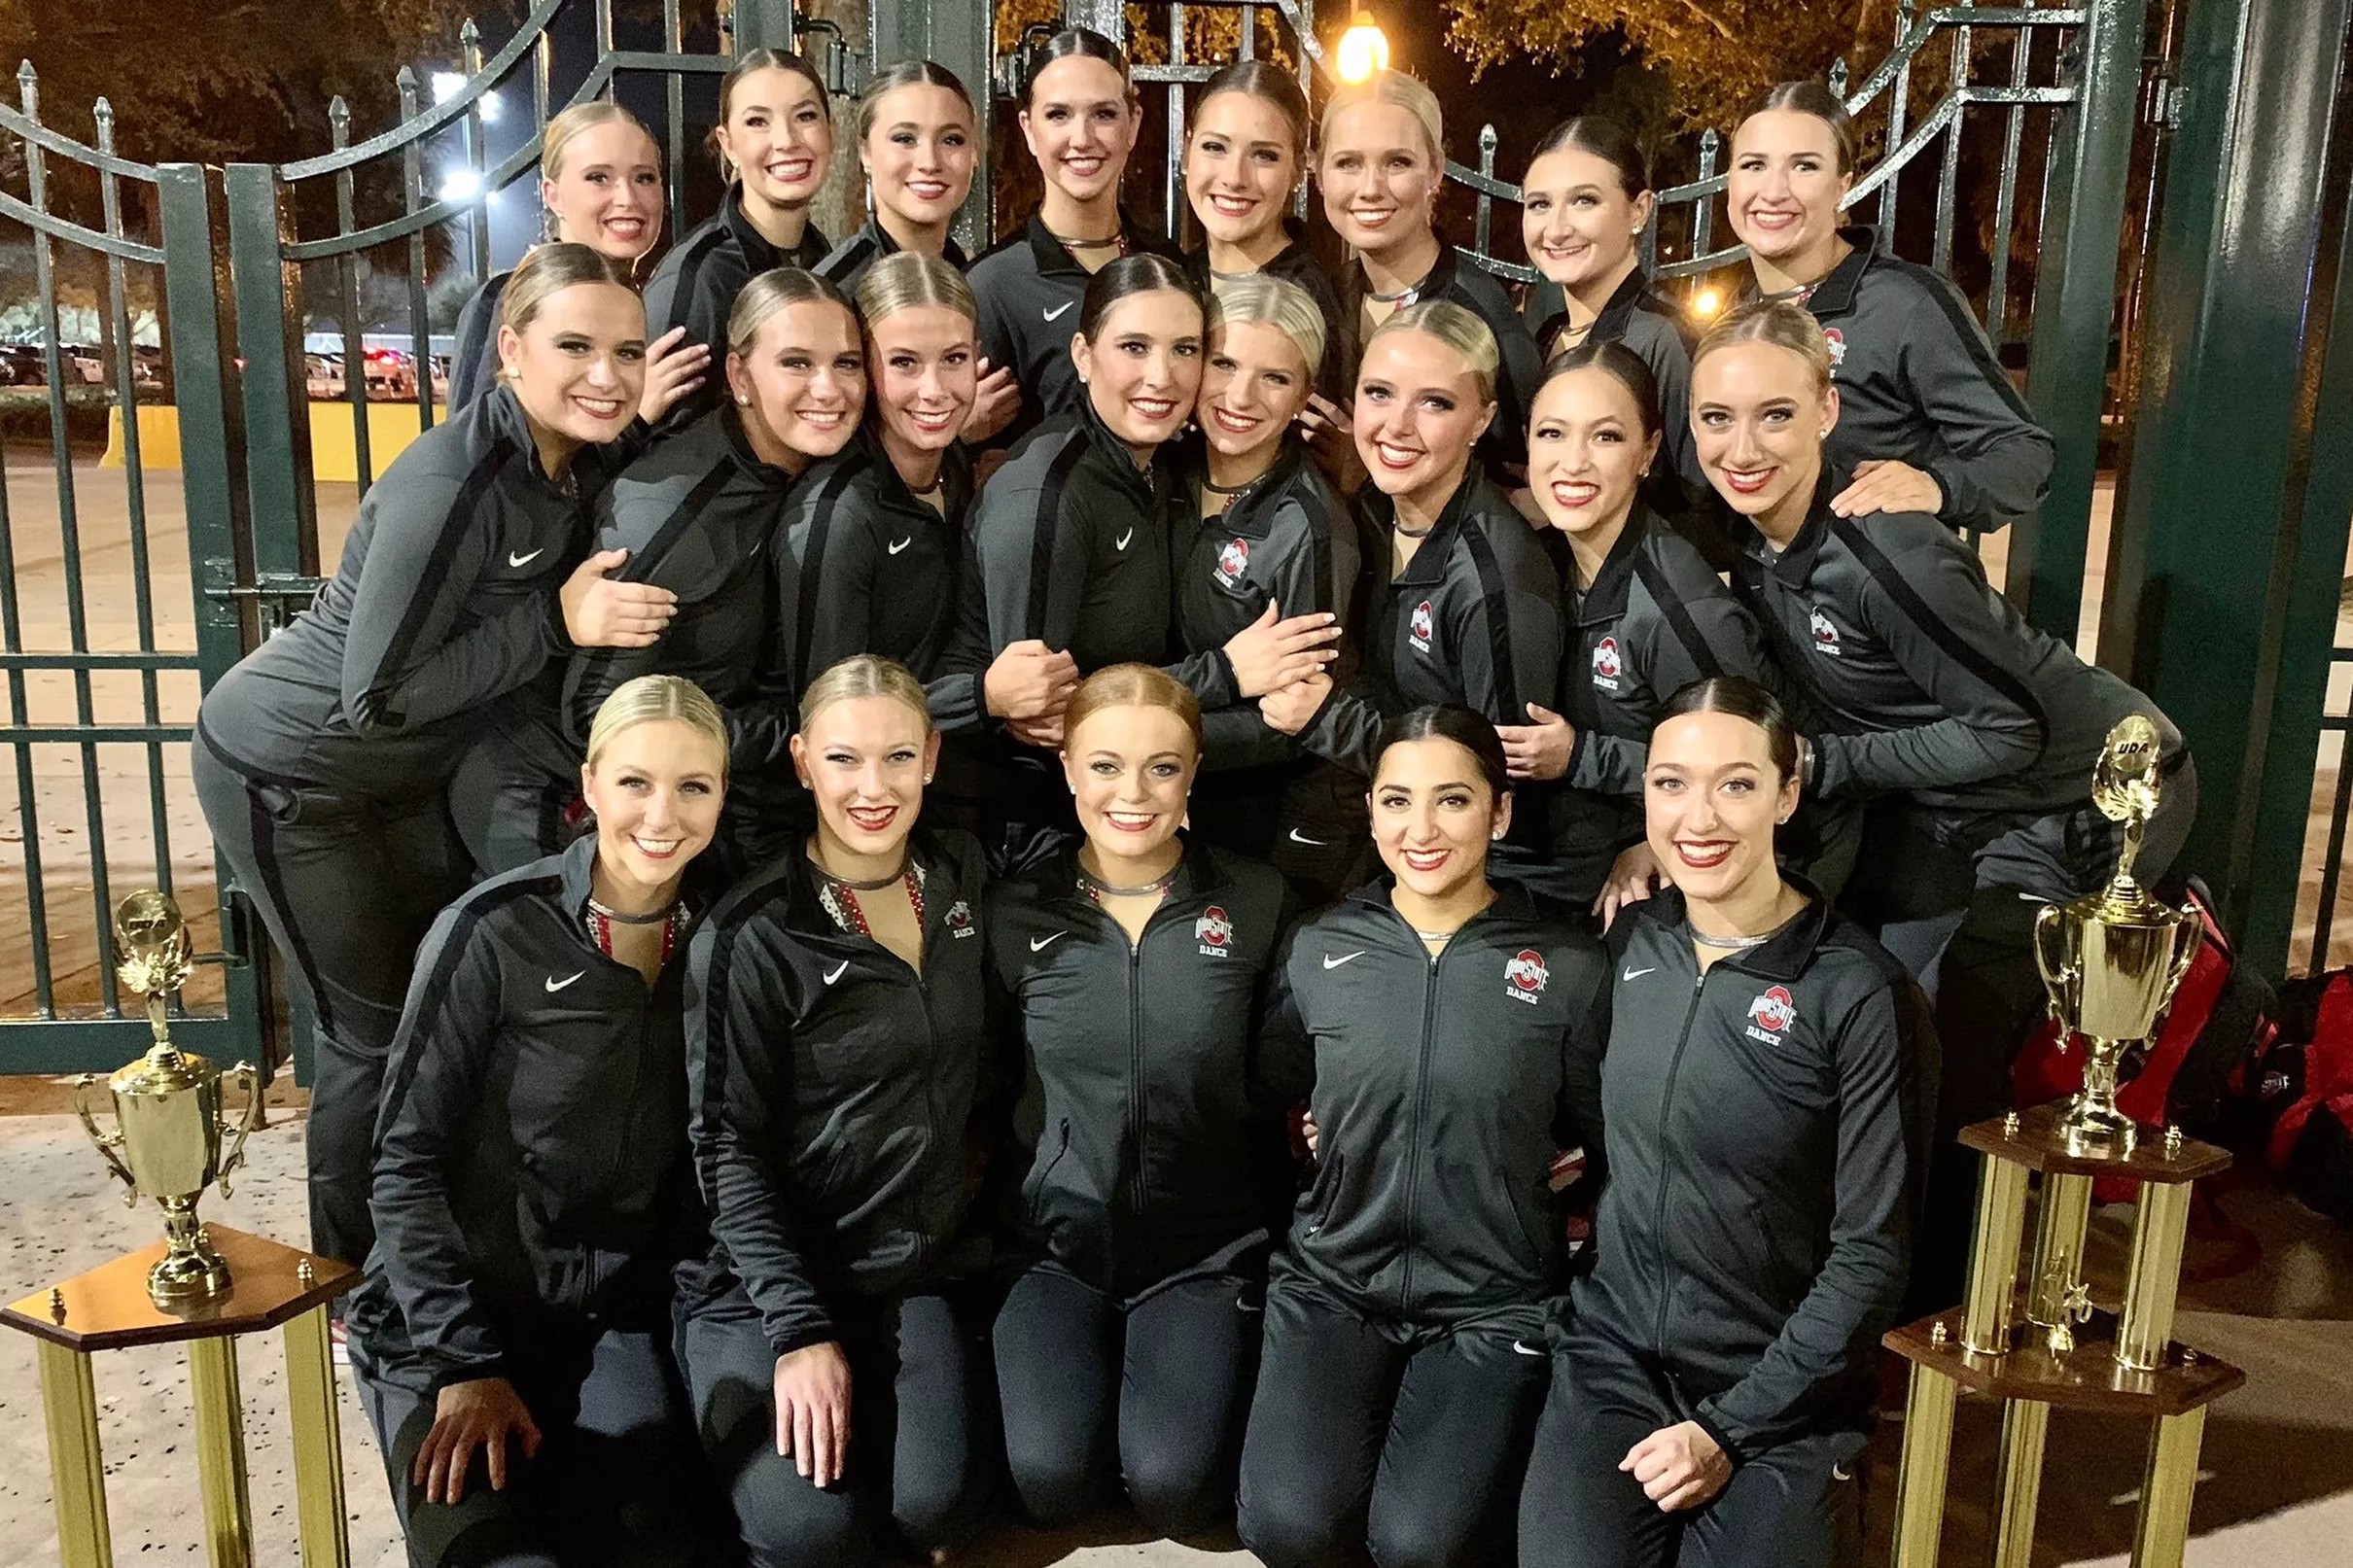 Ohio State dance team brings home national title